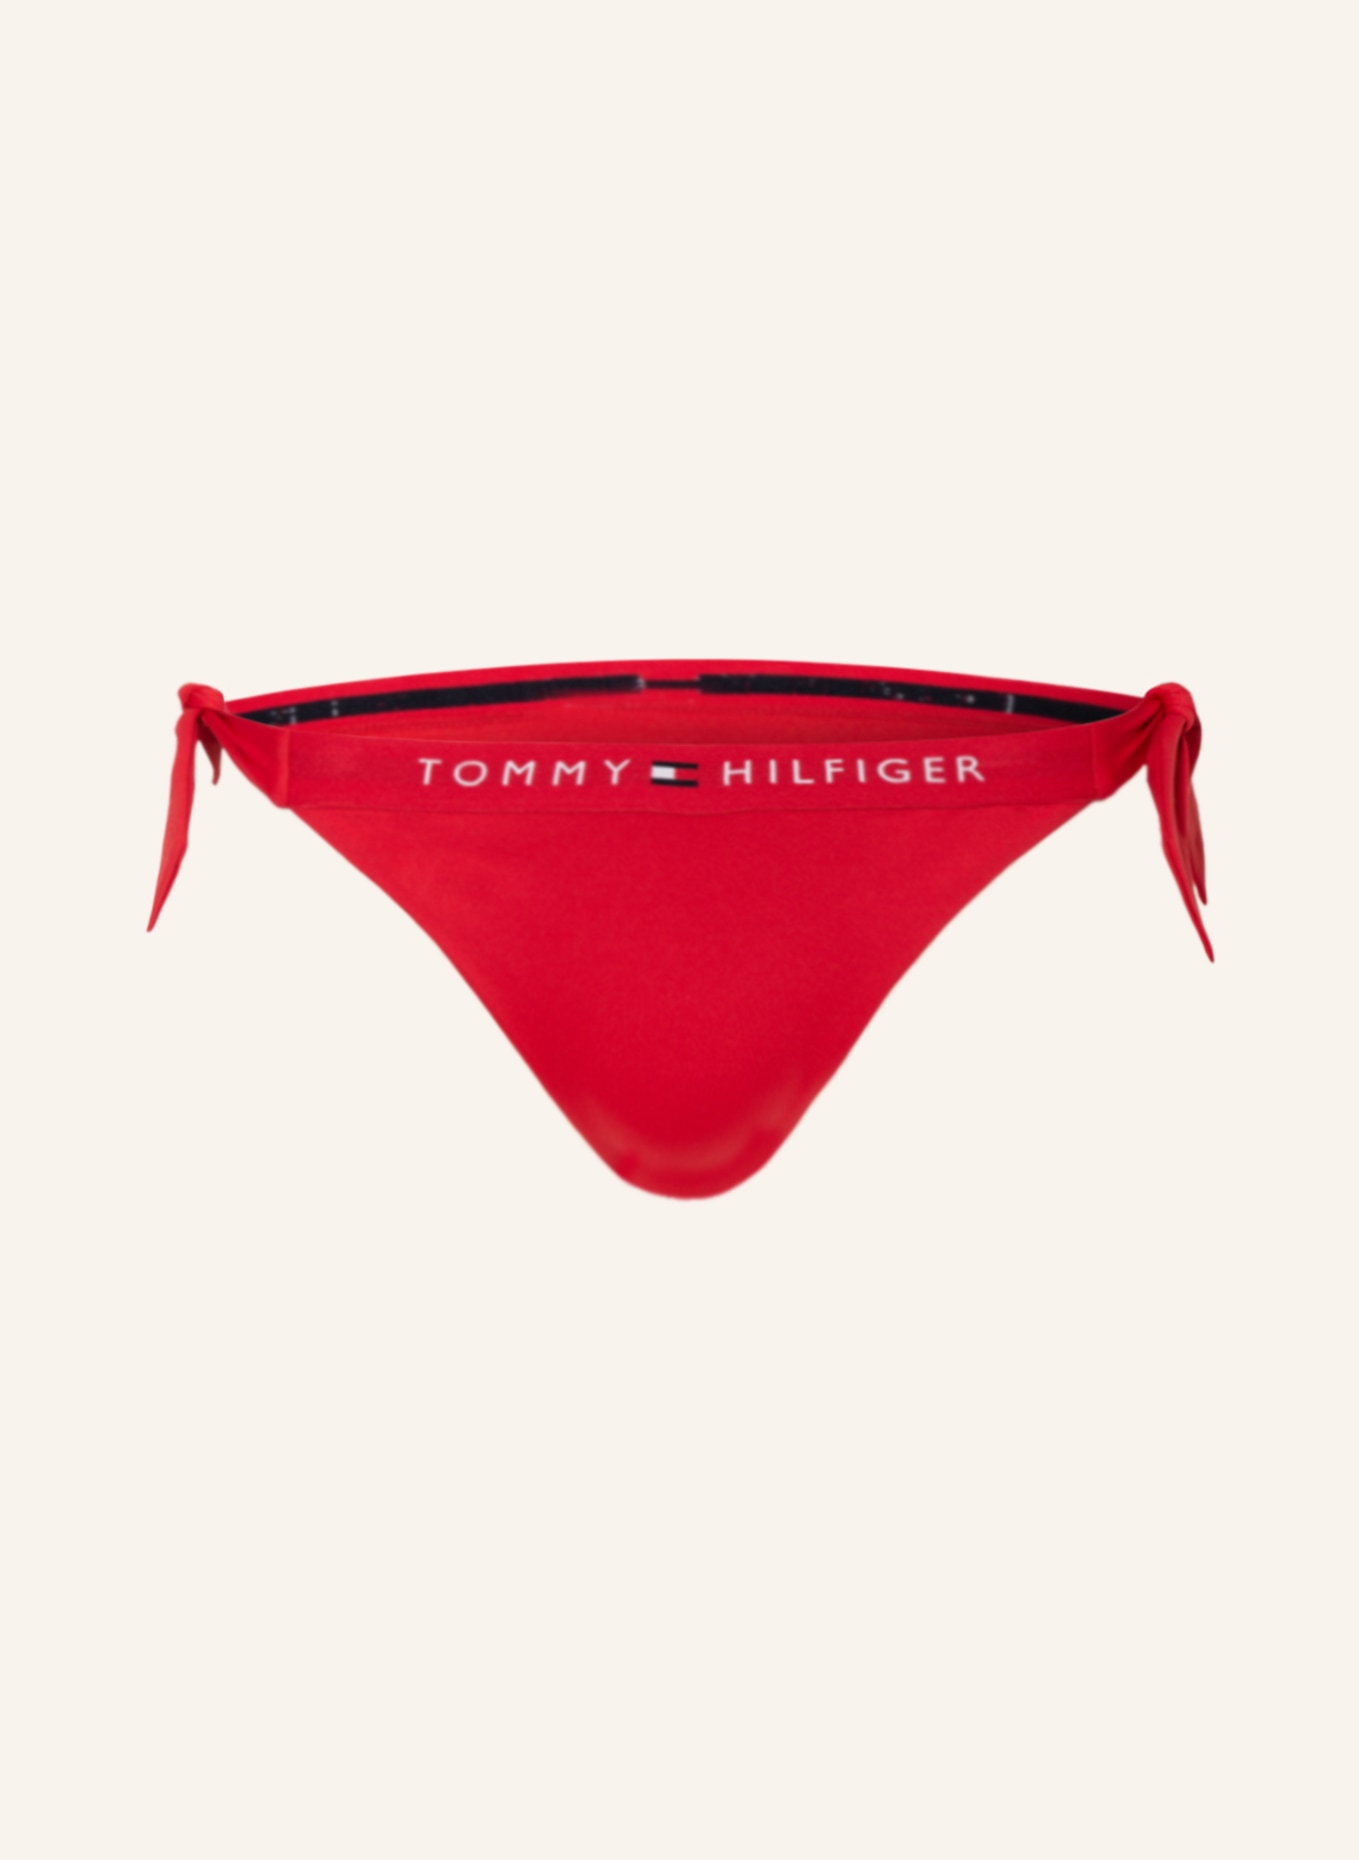 TOMMY HILFIGER Triangle bikini bottoms, Color: RED (Image 1)